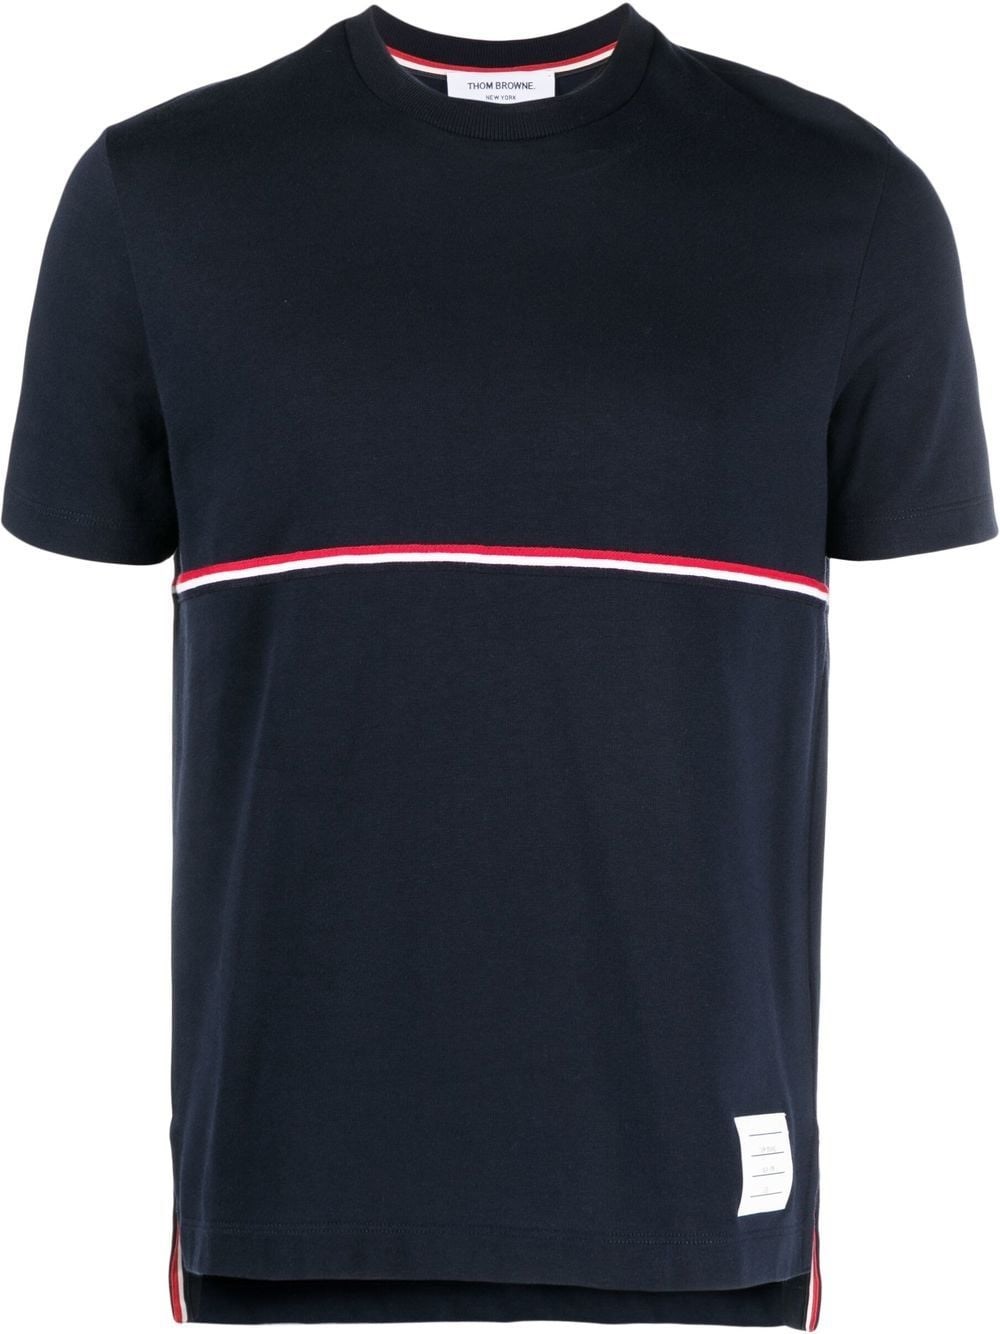 thom browne T-SHIRT available on montiboutique.com - 54082